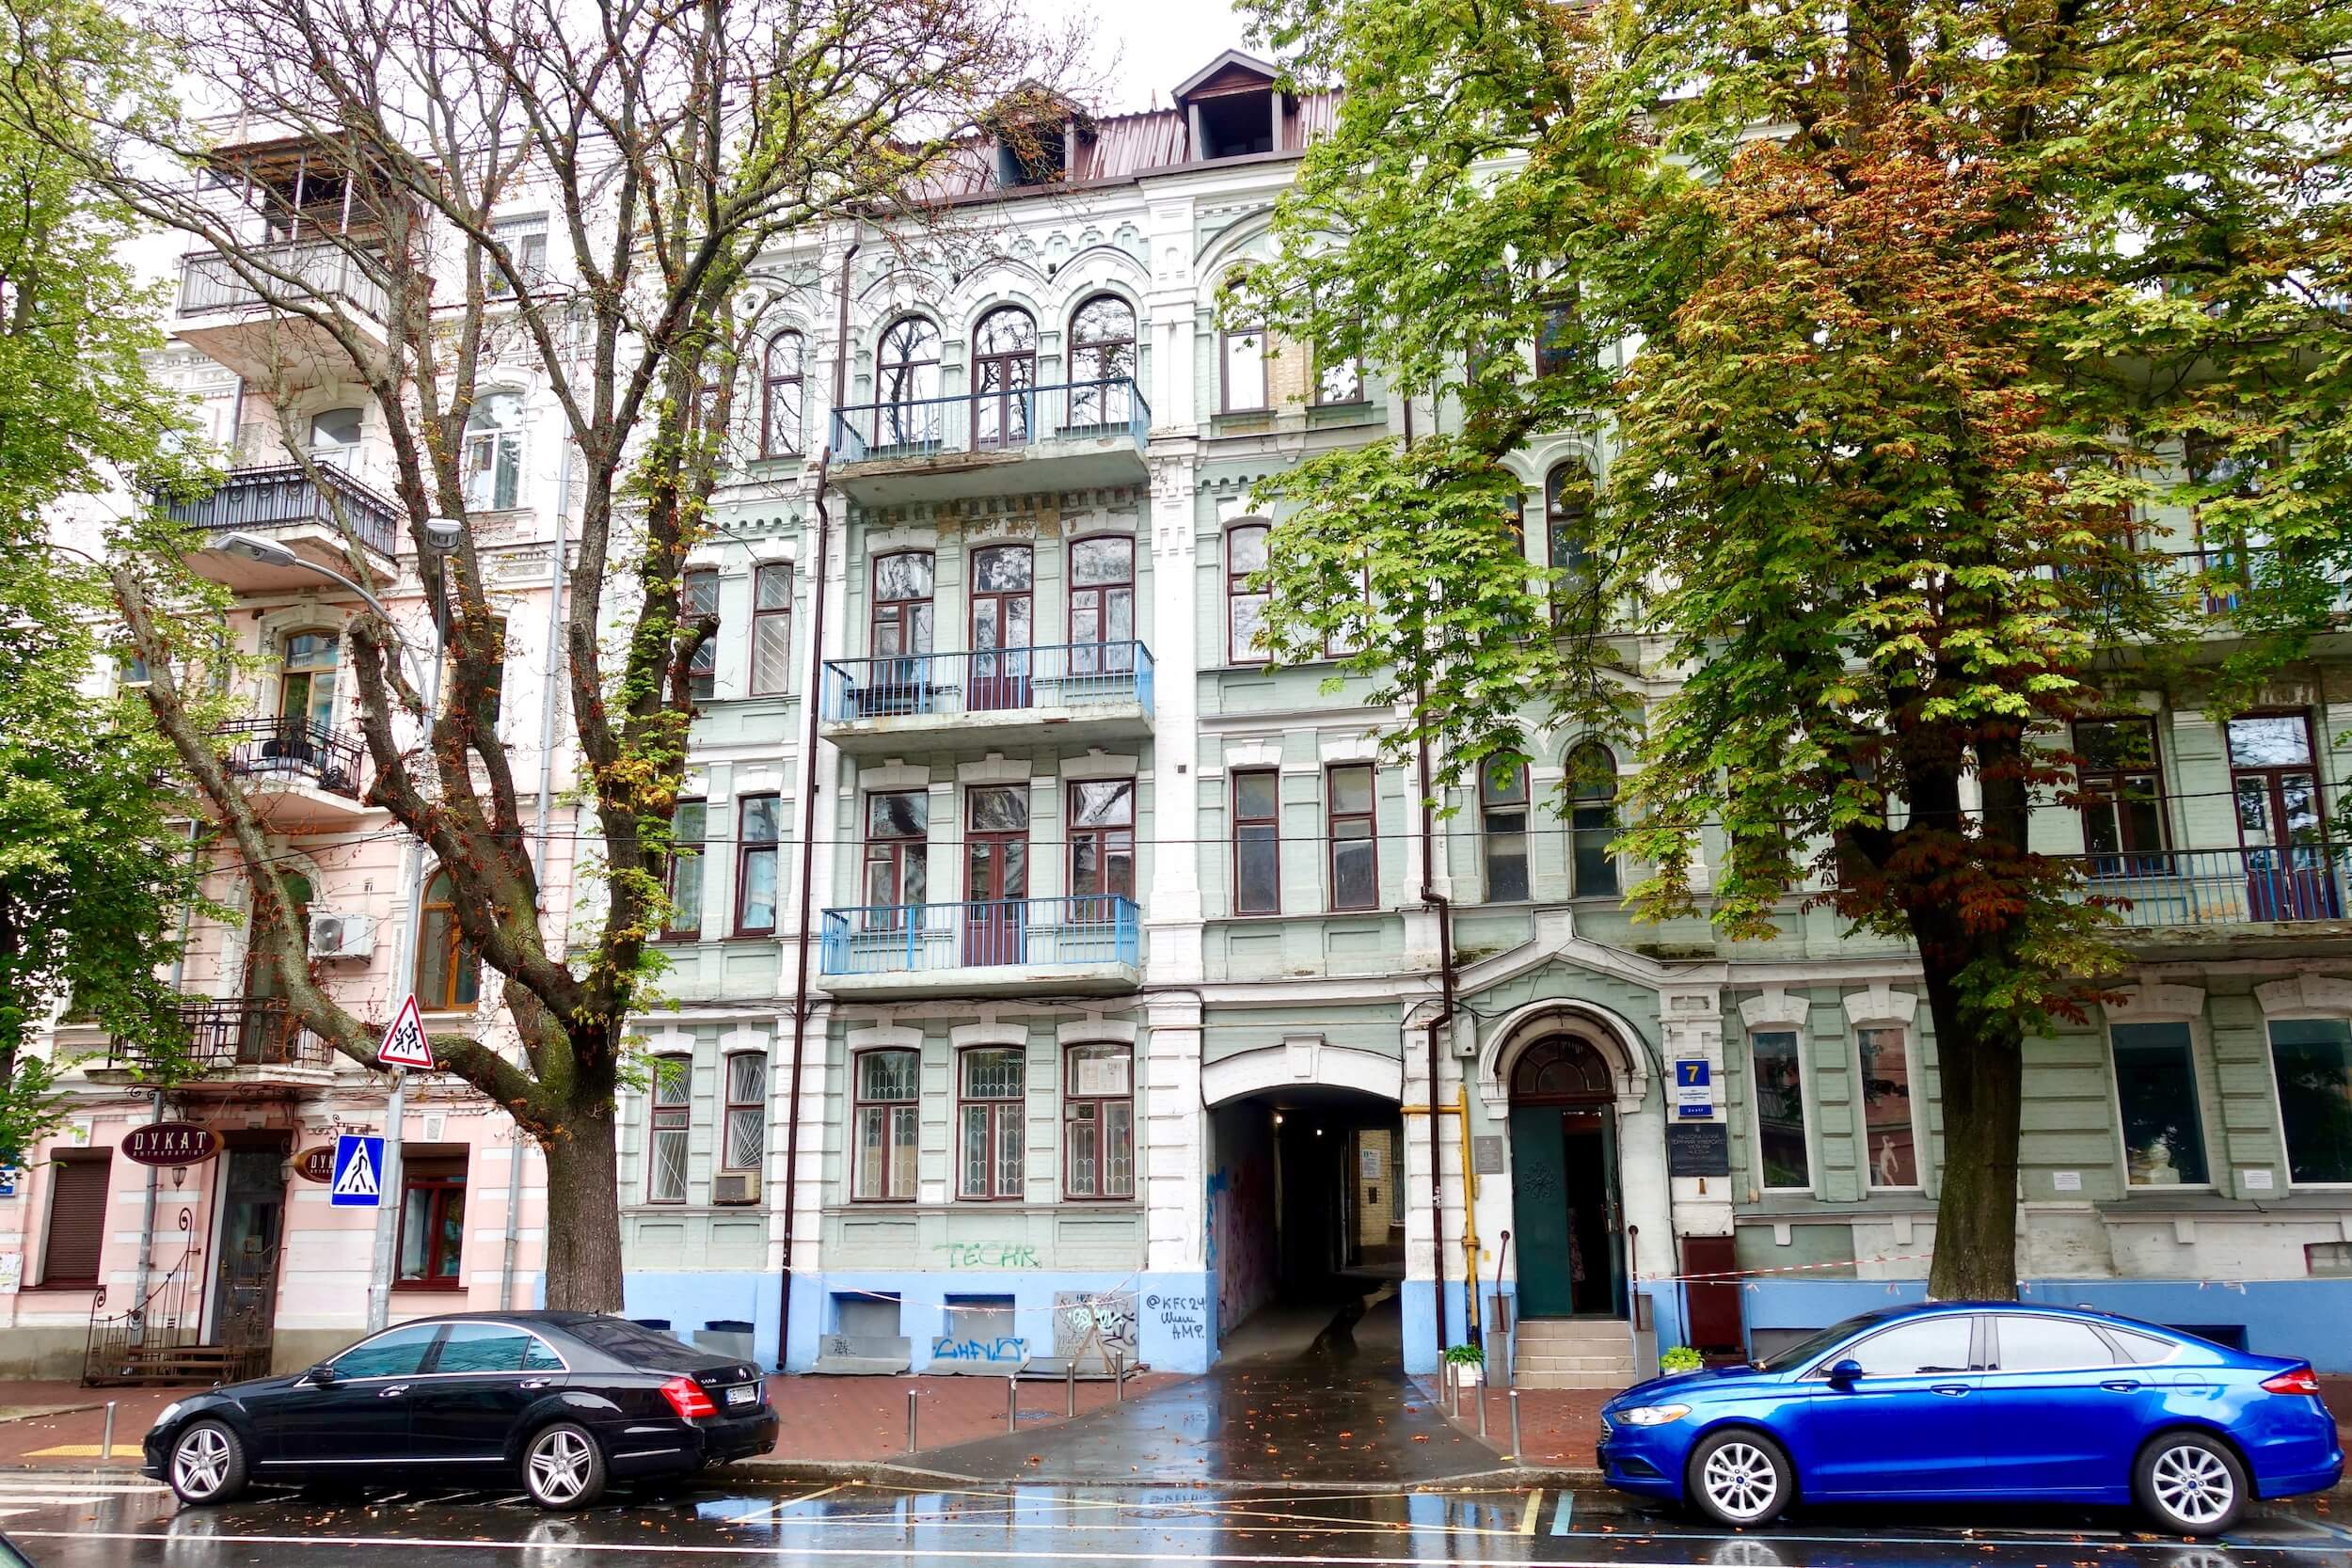 Apartment buildings on the streets of Kiev give a nod to 19th century design. 